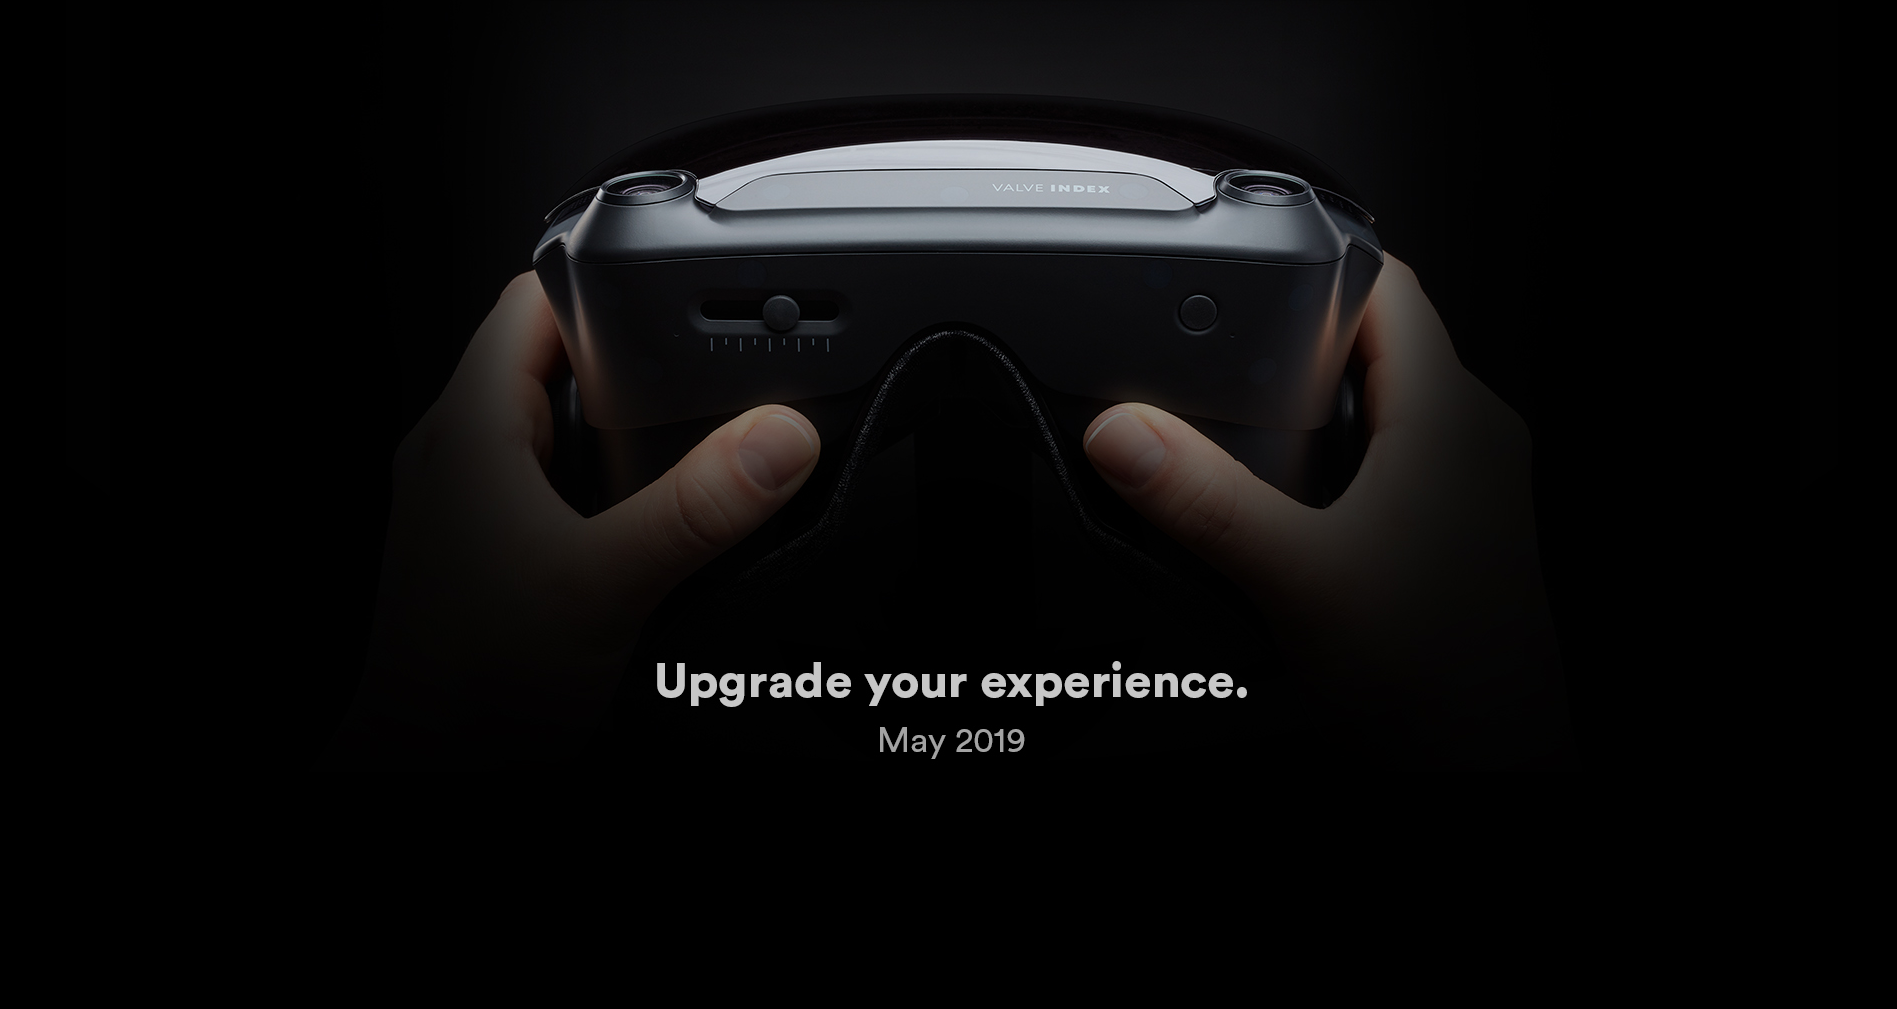 Valve teases its virtual reality headset, the Valve Index